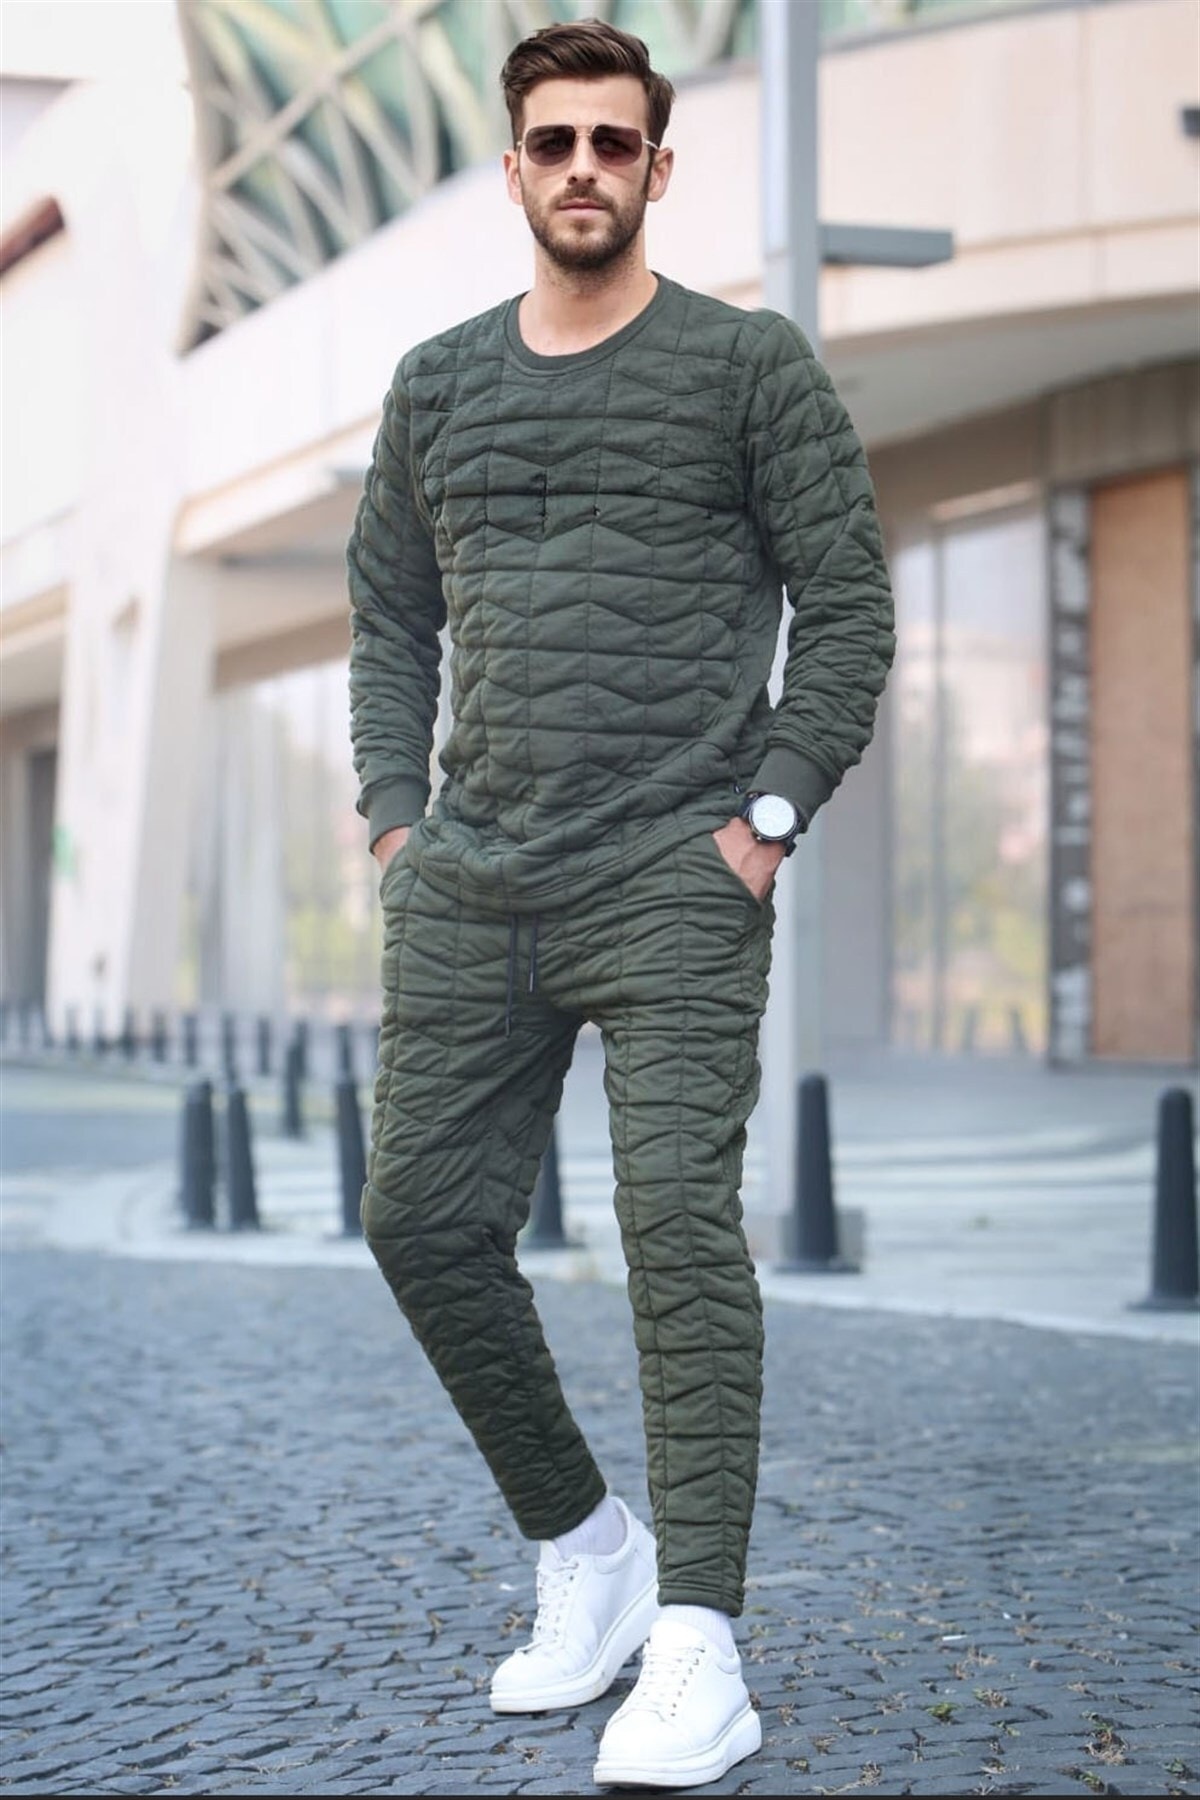 Madmext Khaki Quilted Patterned Tracksuit Set 5907